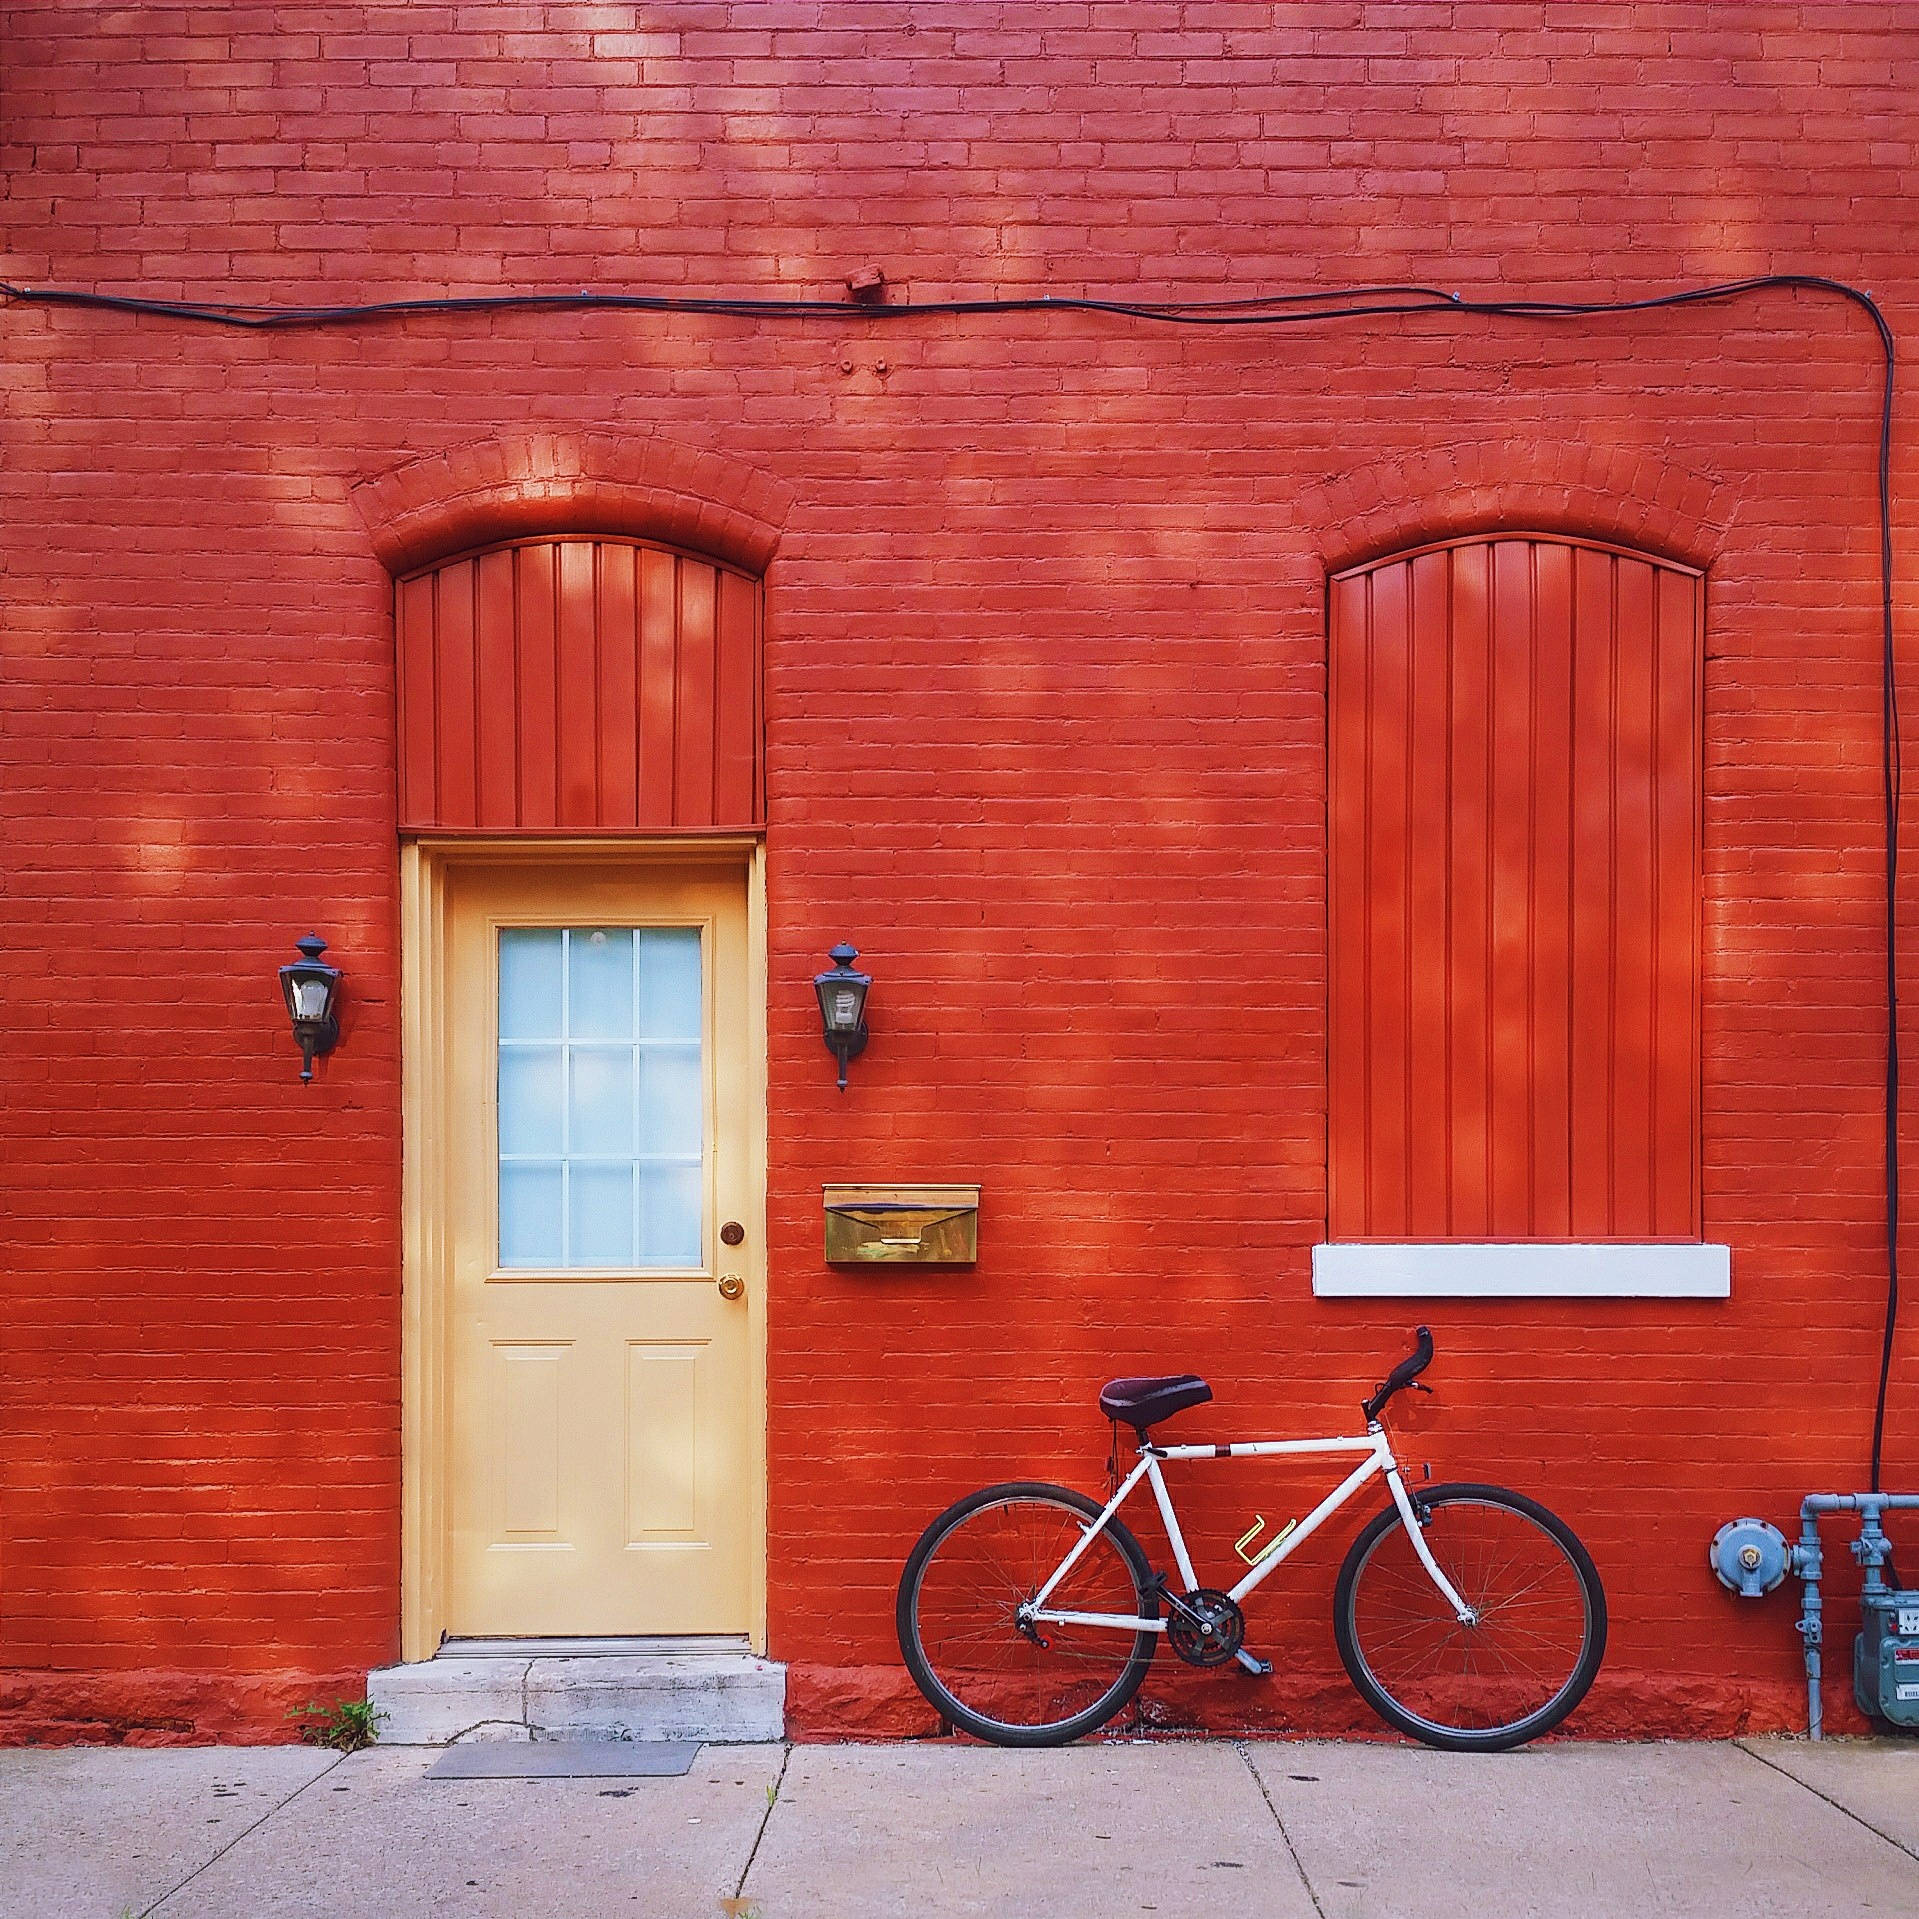 Stunning Red Building And Bicycle